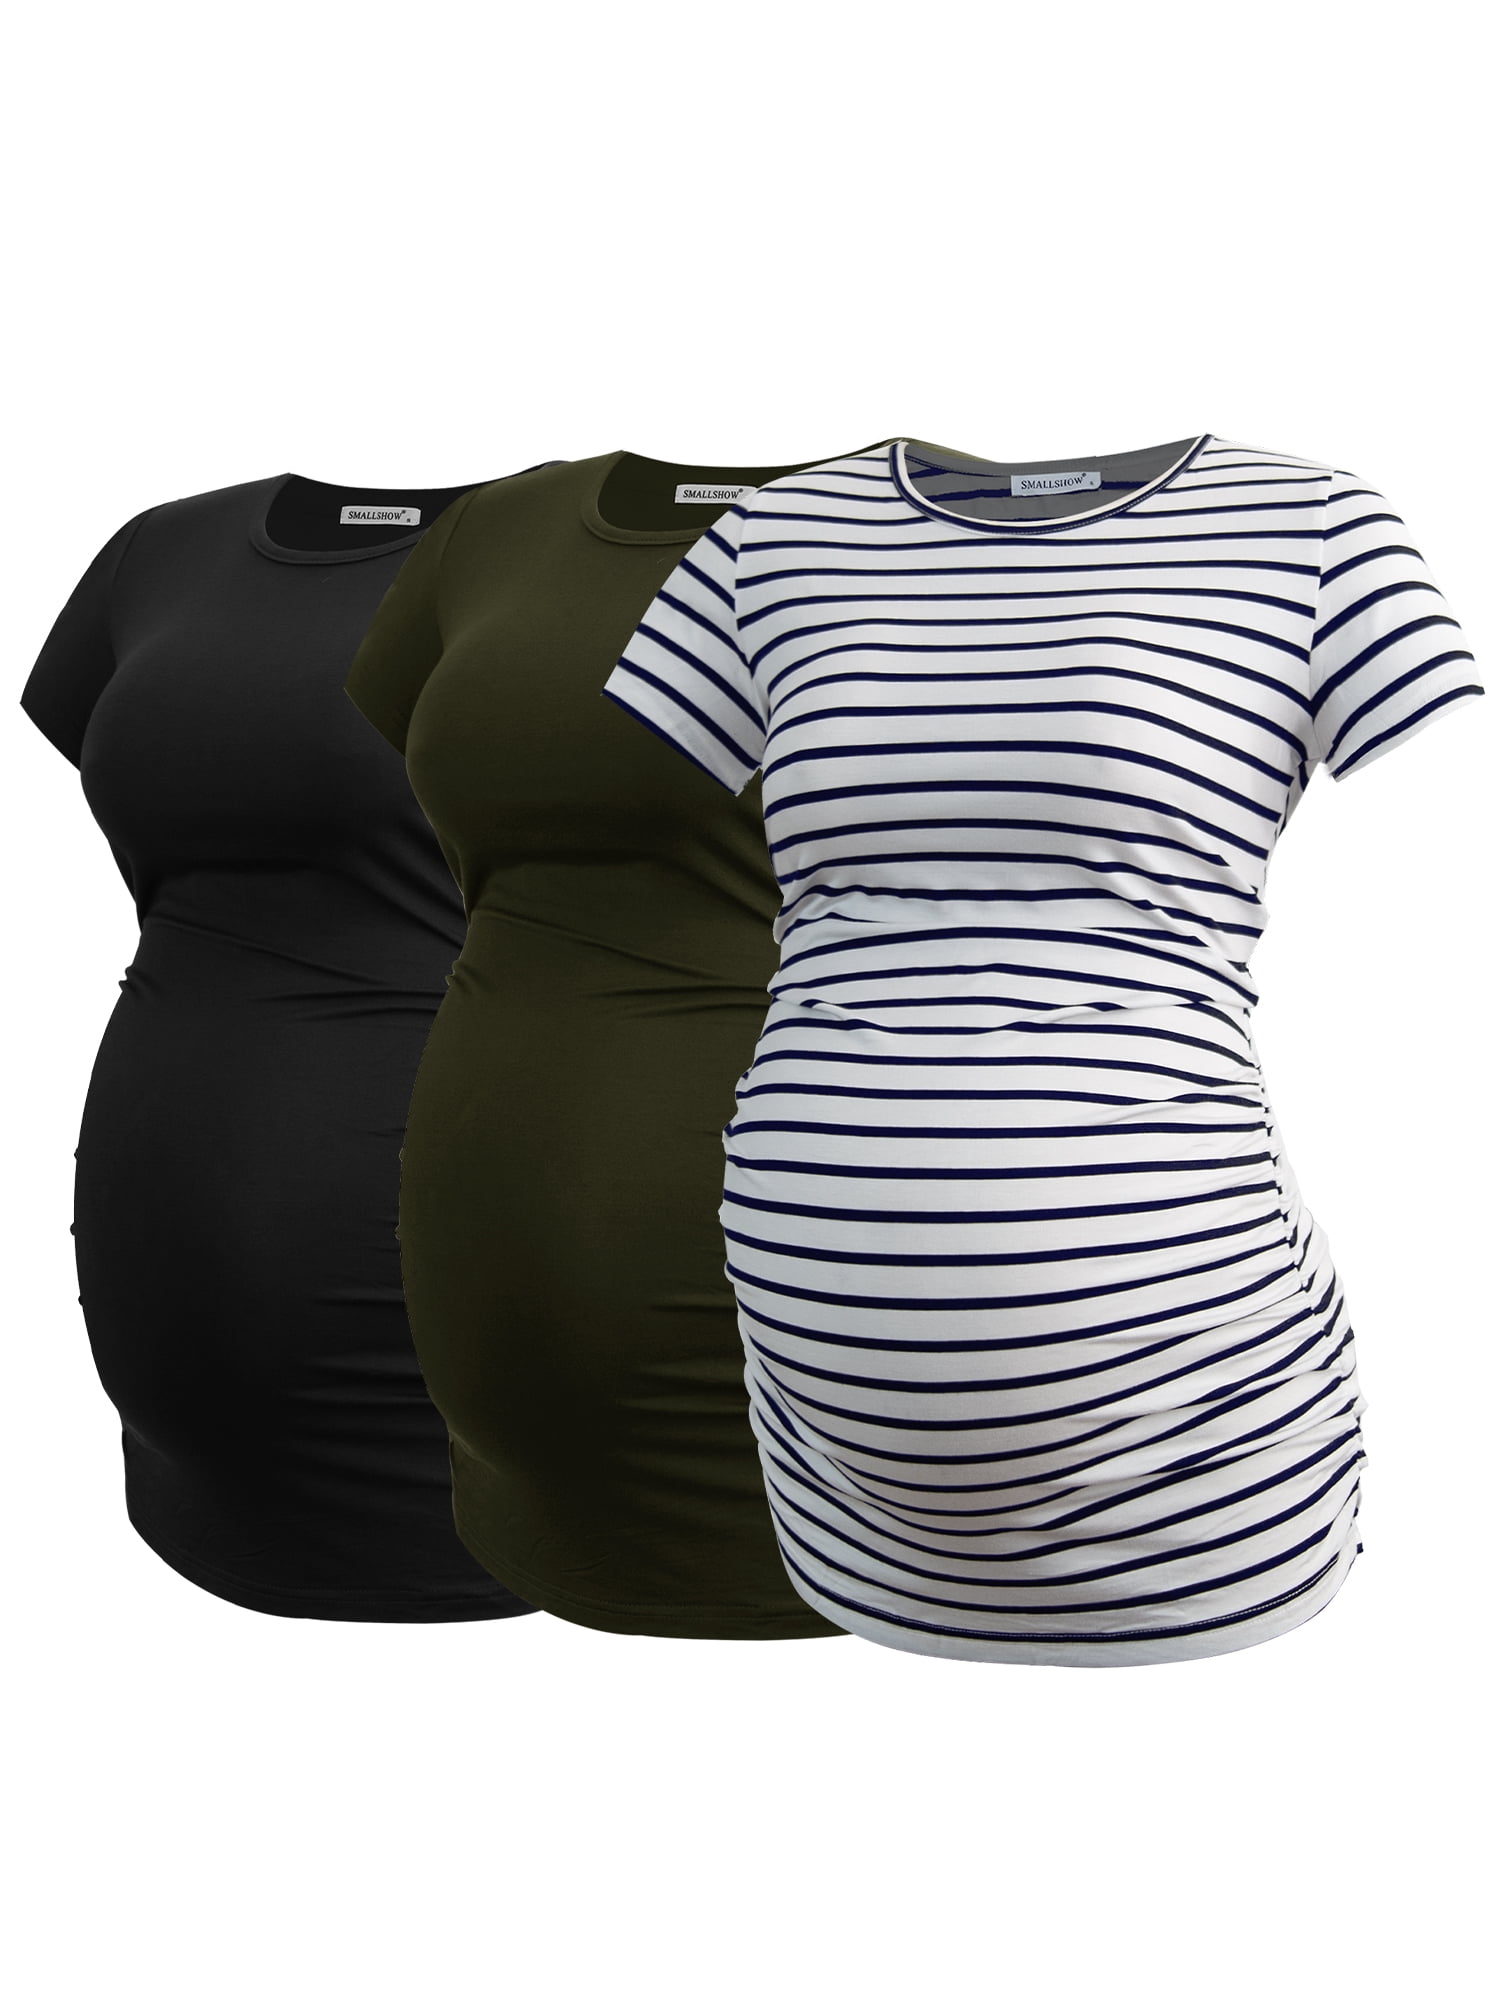 Smallshow Women's V Neck Maternity Shirt Side Ruched Tunic Pregnancy Short Sleeve Top Clothes 3-Pack